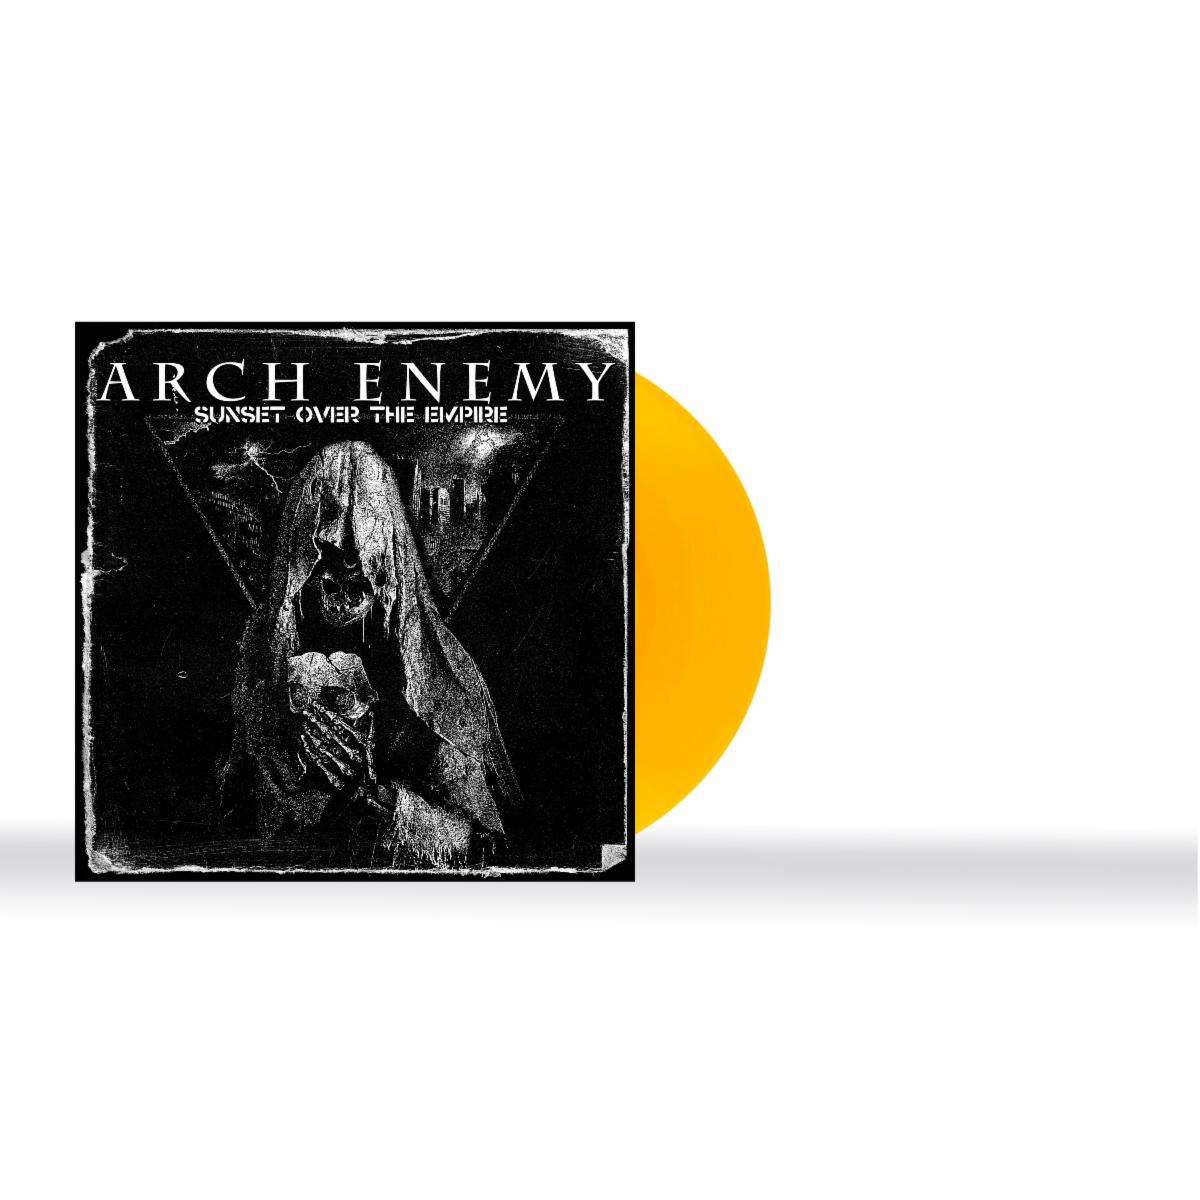 Download the Arch Enemy Doomsday Machine from Mediafire and Blogspot